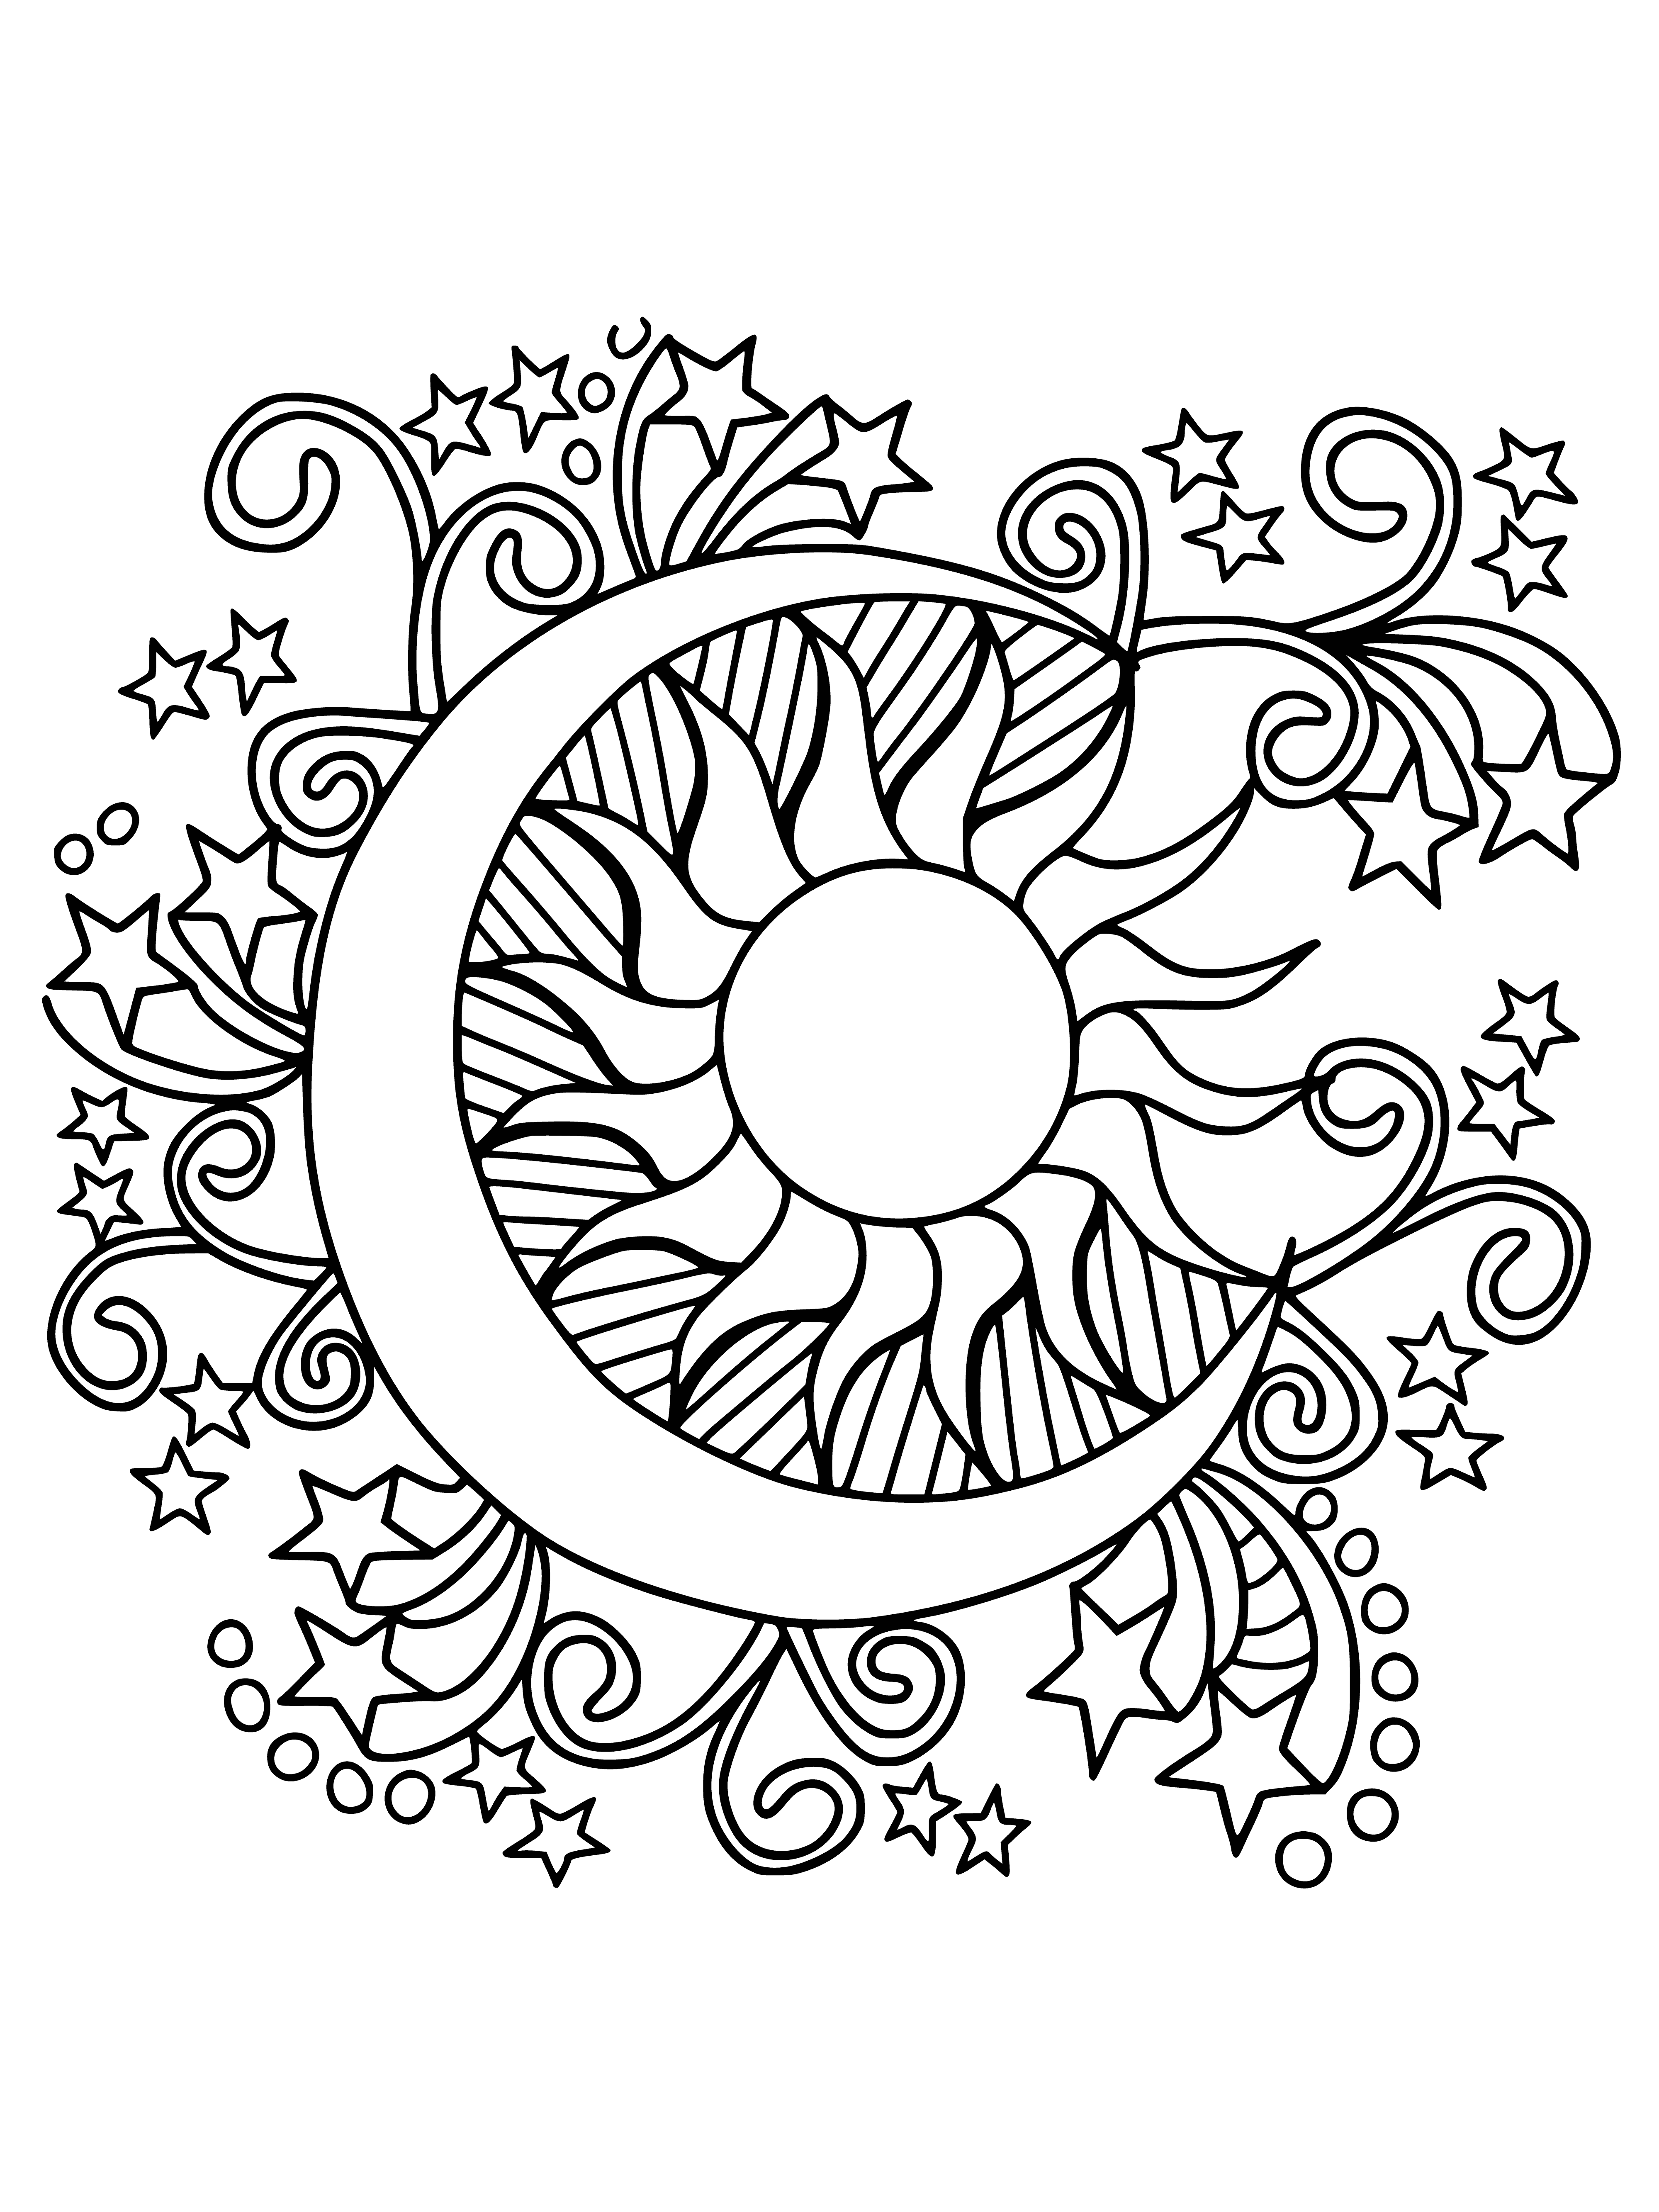 Crescent and Sun coloring page